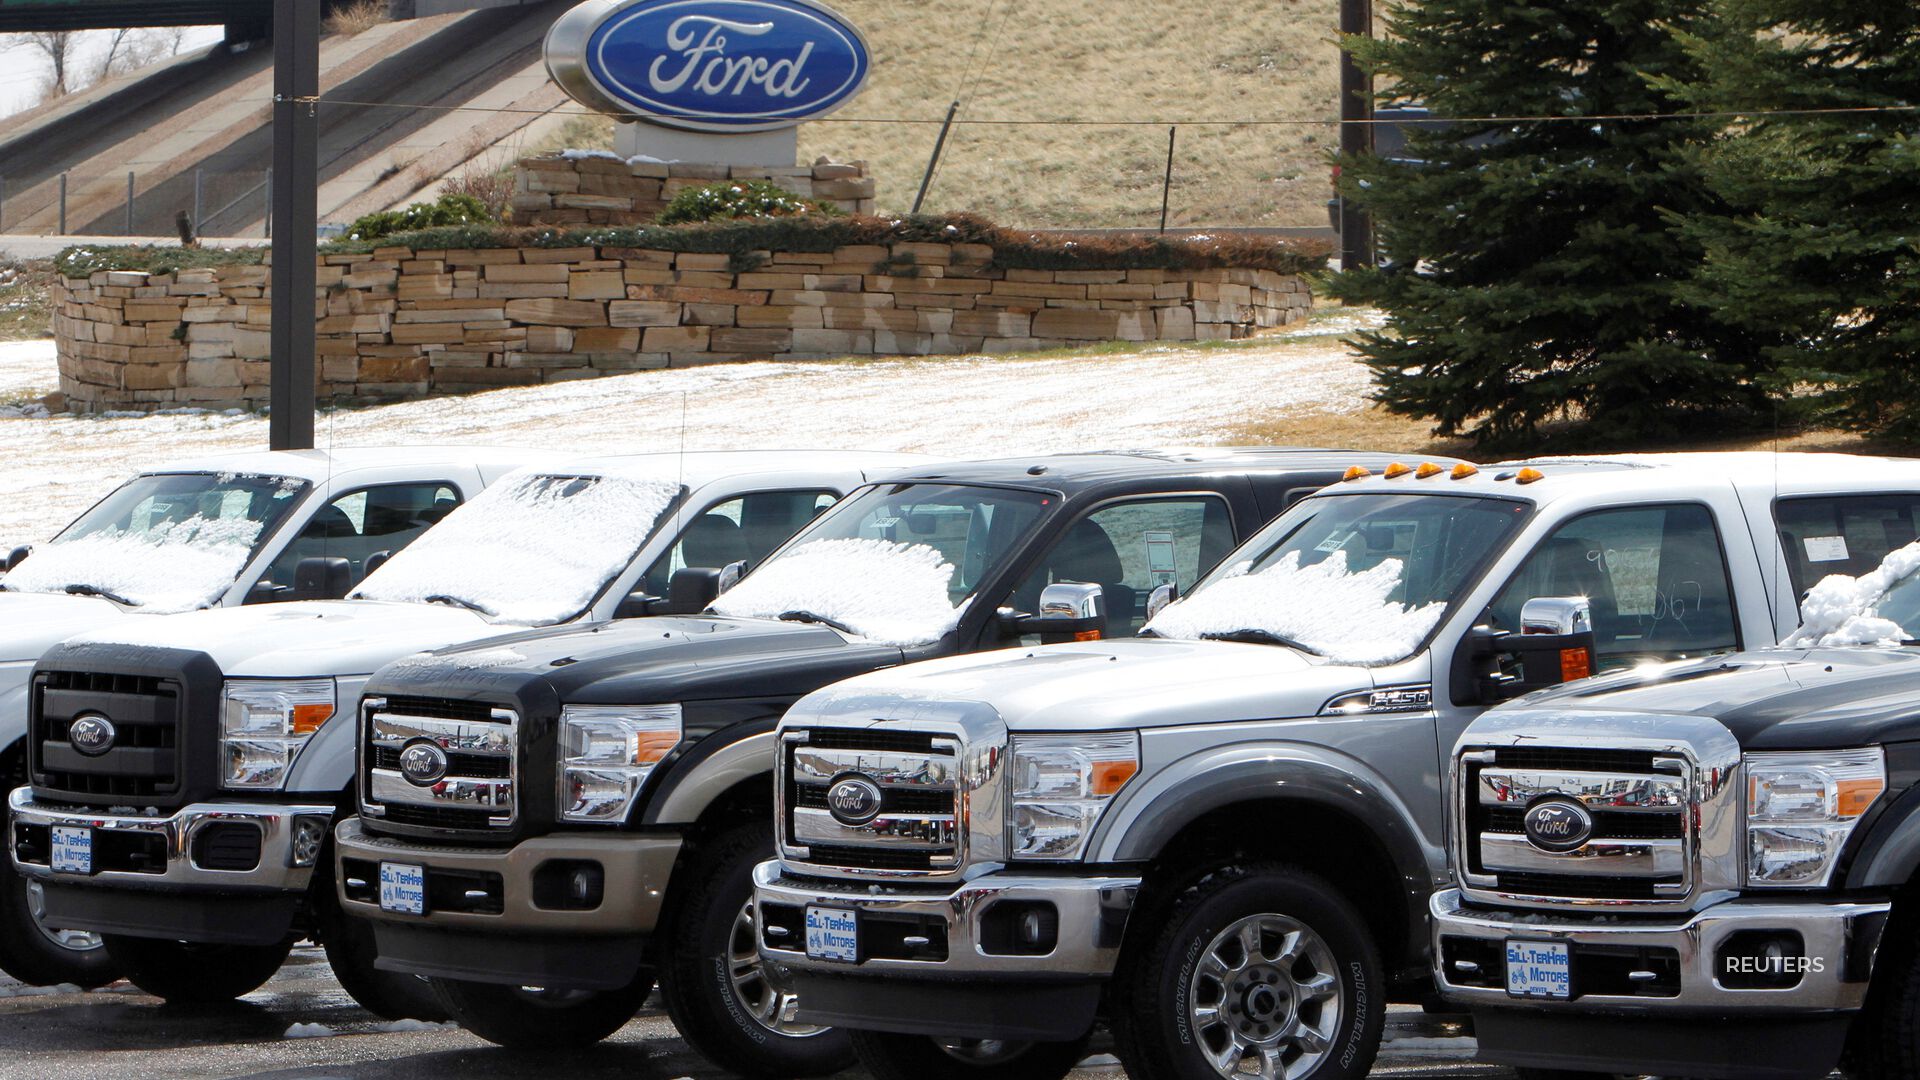 Ford Motor Company announced it plans to appeal the nearly  billion verdict issued against the company over some of its roofs late last week.